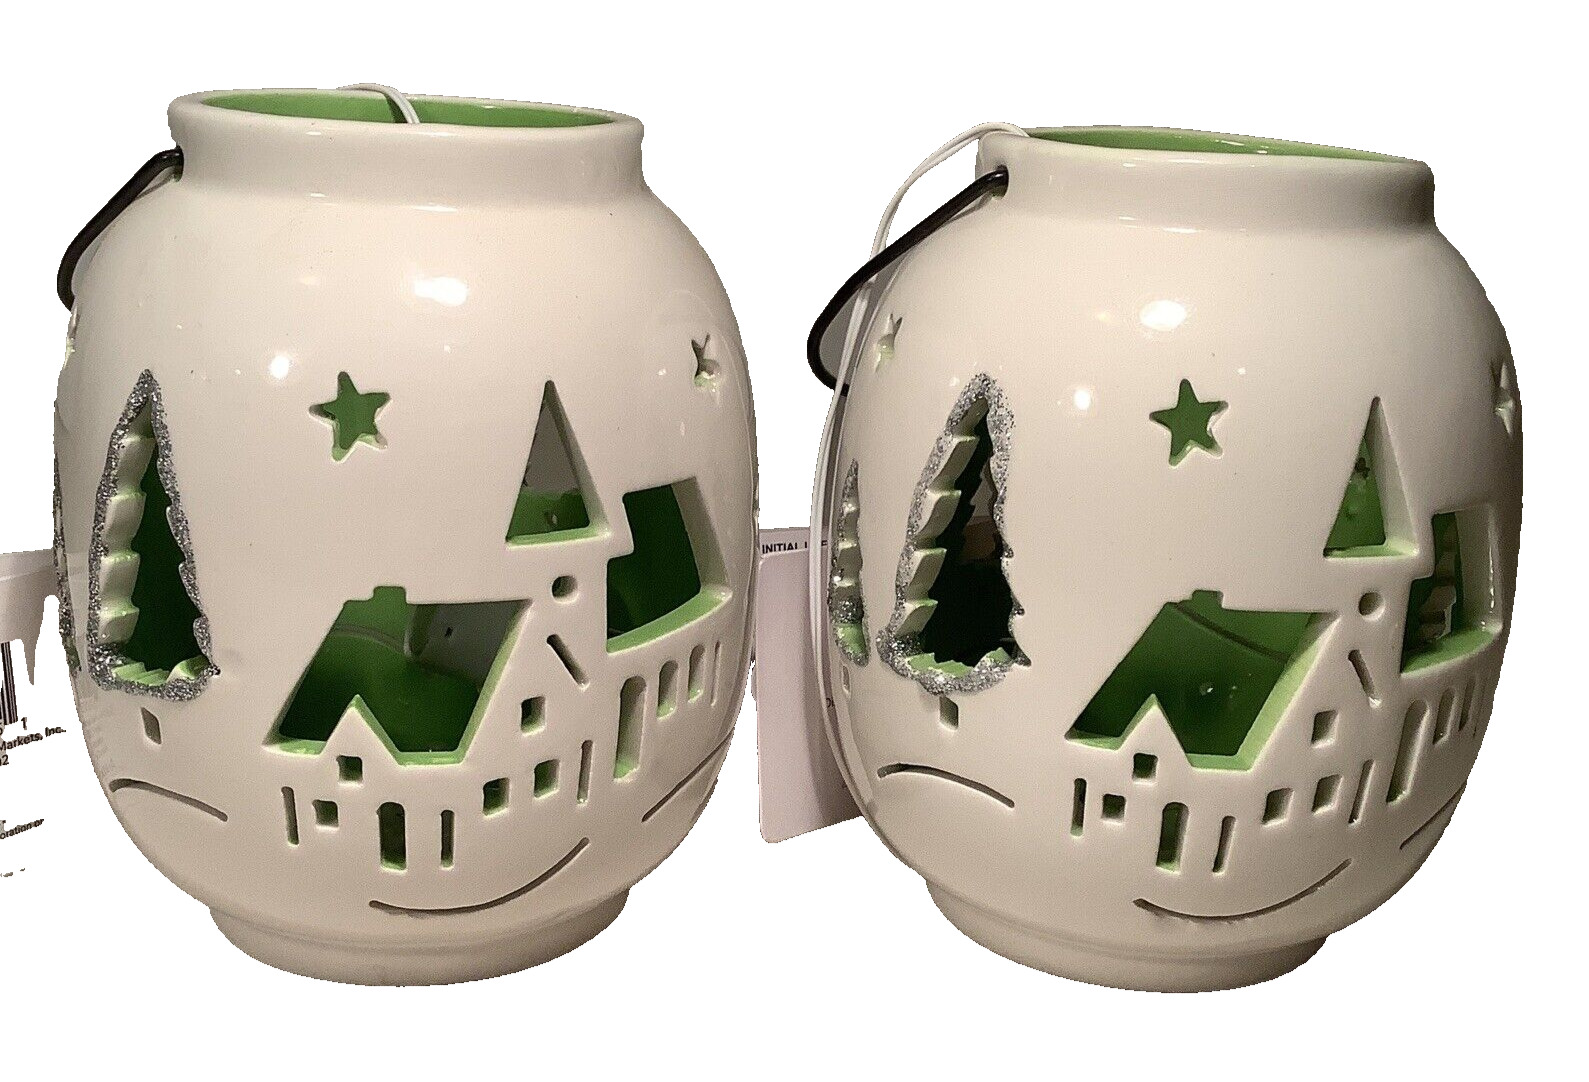 Ceramic Holiday Lighted Lanterns-w/Battery Operated LED Lights by Publix Brand🏡